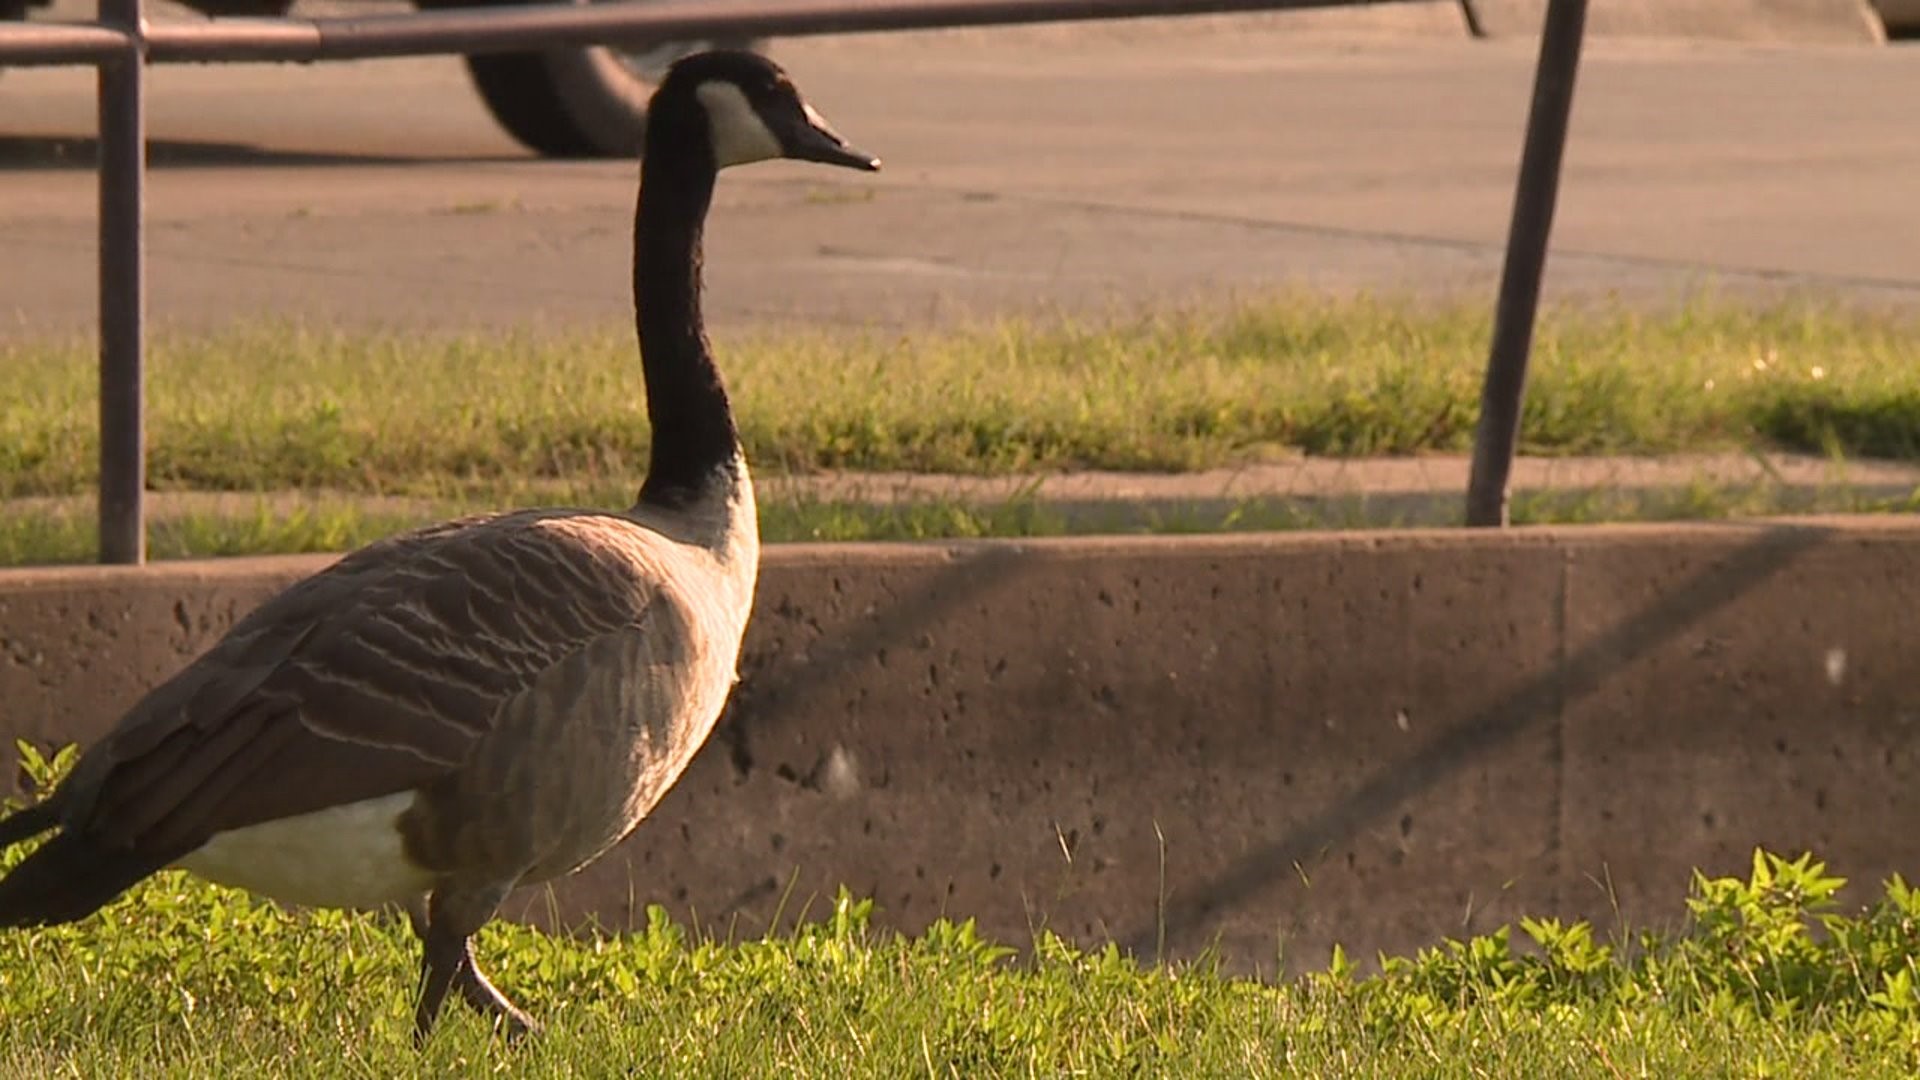 Moline puts up fences to keep geese away